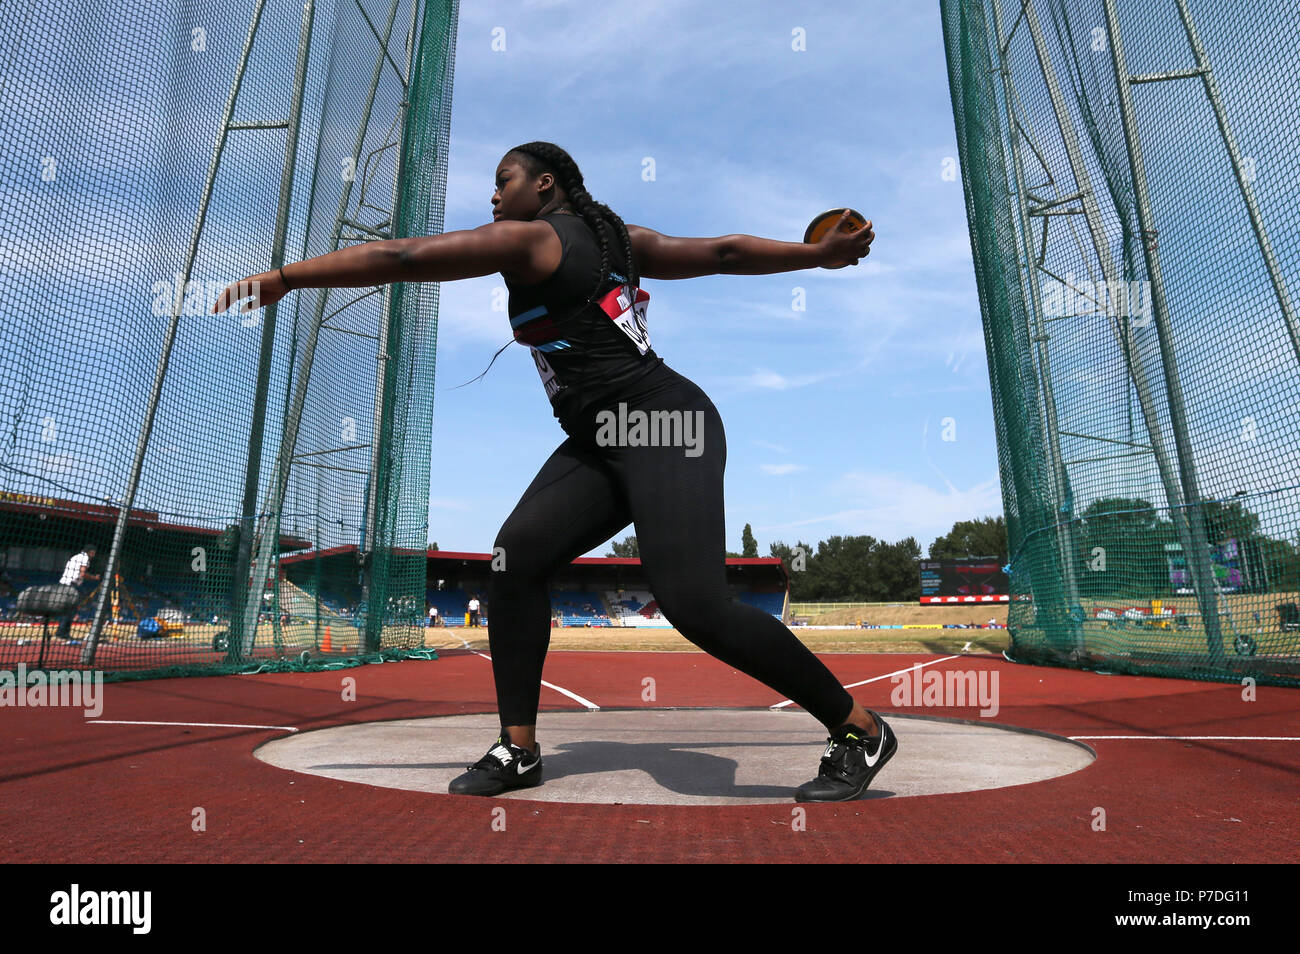 Great Britain's Divine Oladipo competes in the Dicsus Throw during day two of the Muller British Athletics Championships at Alexander Stadium, Birmingham. Stock Photo